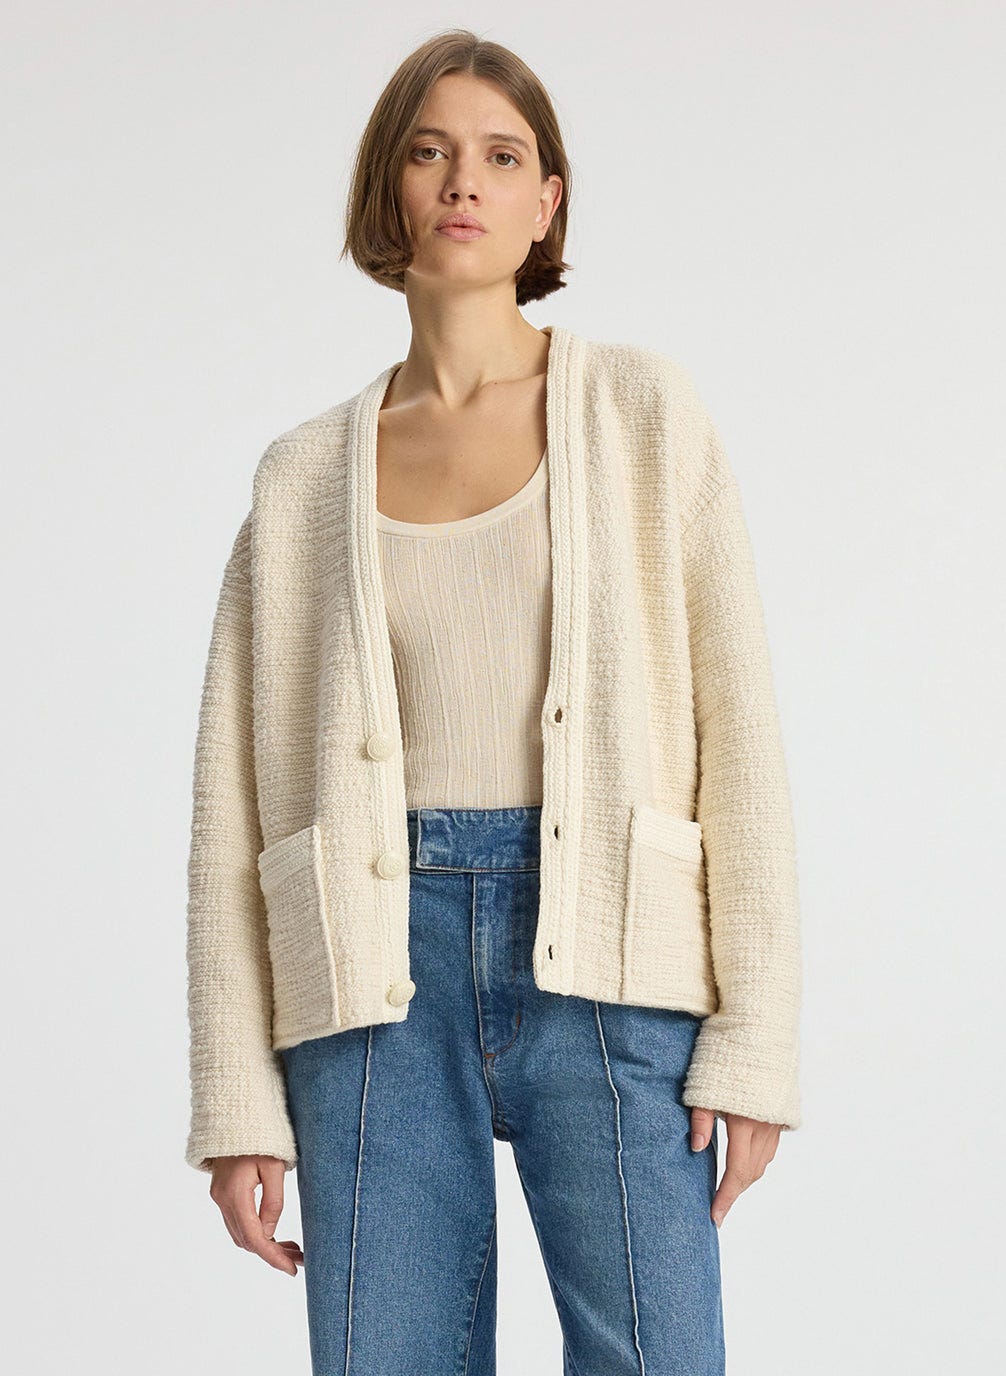 front view of woman wearing cream boucle jacket, cream tank top and medium blue denim jeans #1